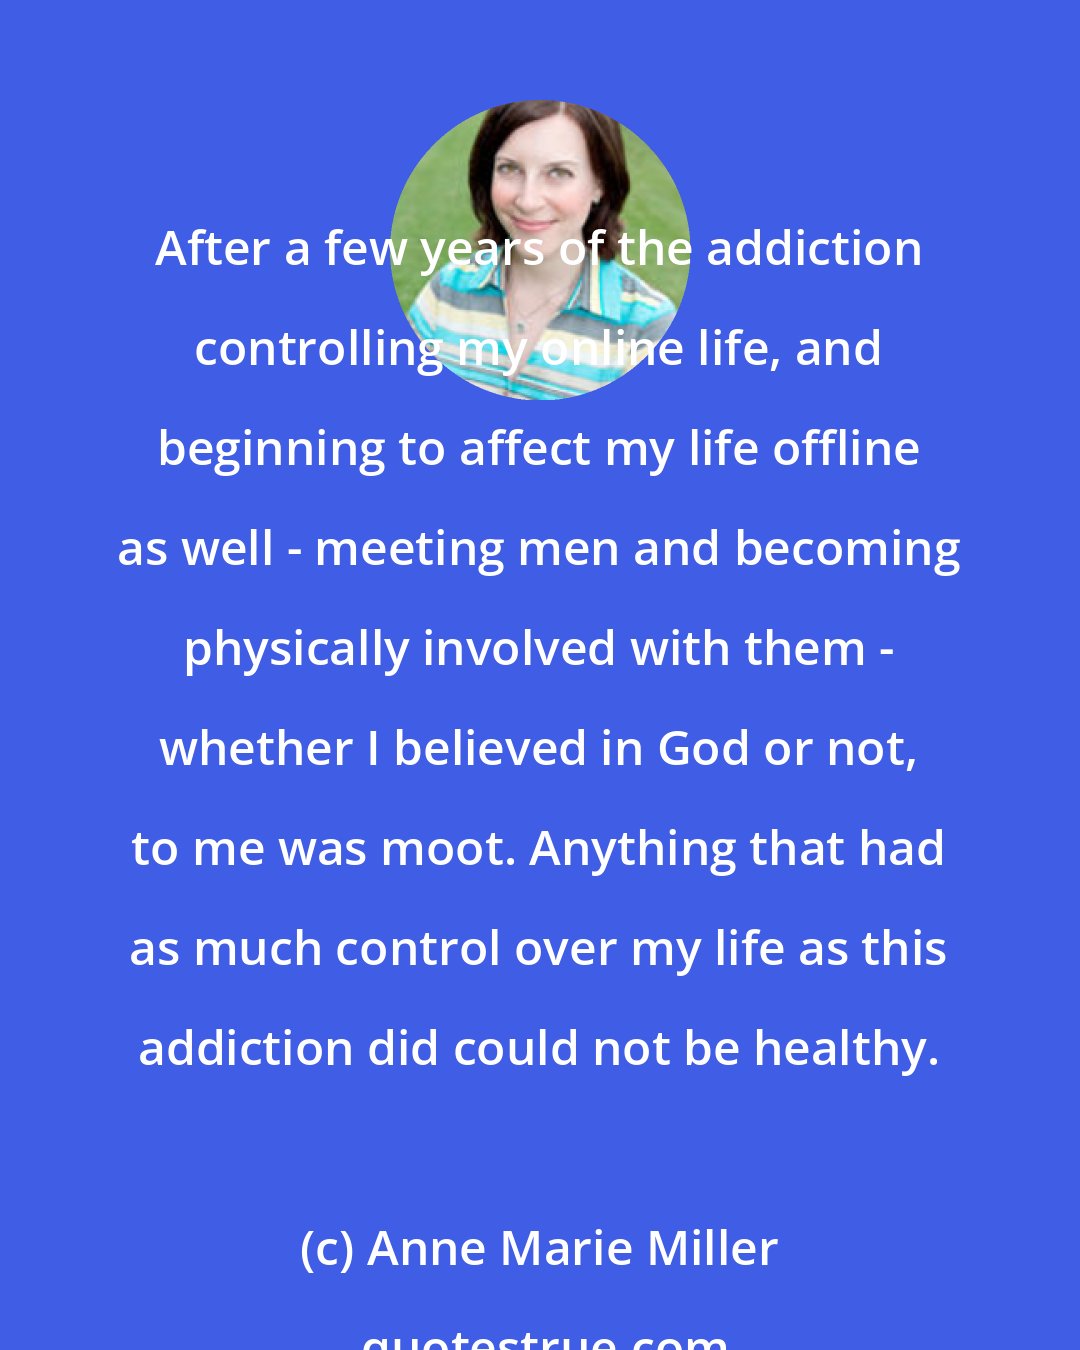 Anne Marie Miller: After a few years of the addiction controlling my online life, and beginning to affect my life offline as well - meeting men and becoming physically involved with them - whether I believed in God or not, to me was moot. Anything that had as much control over my life as this addiction did could not be healthy.